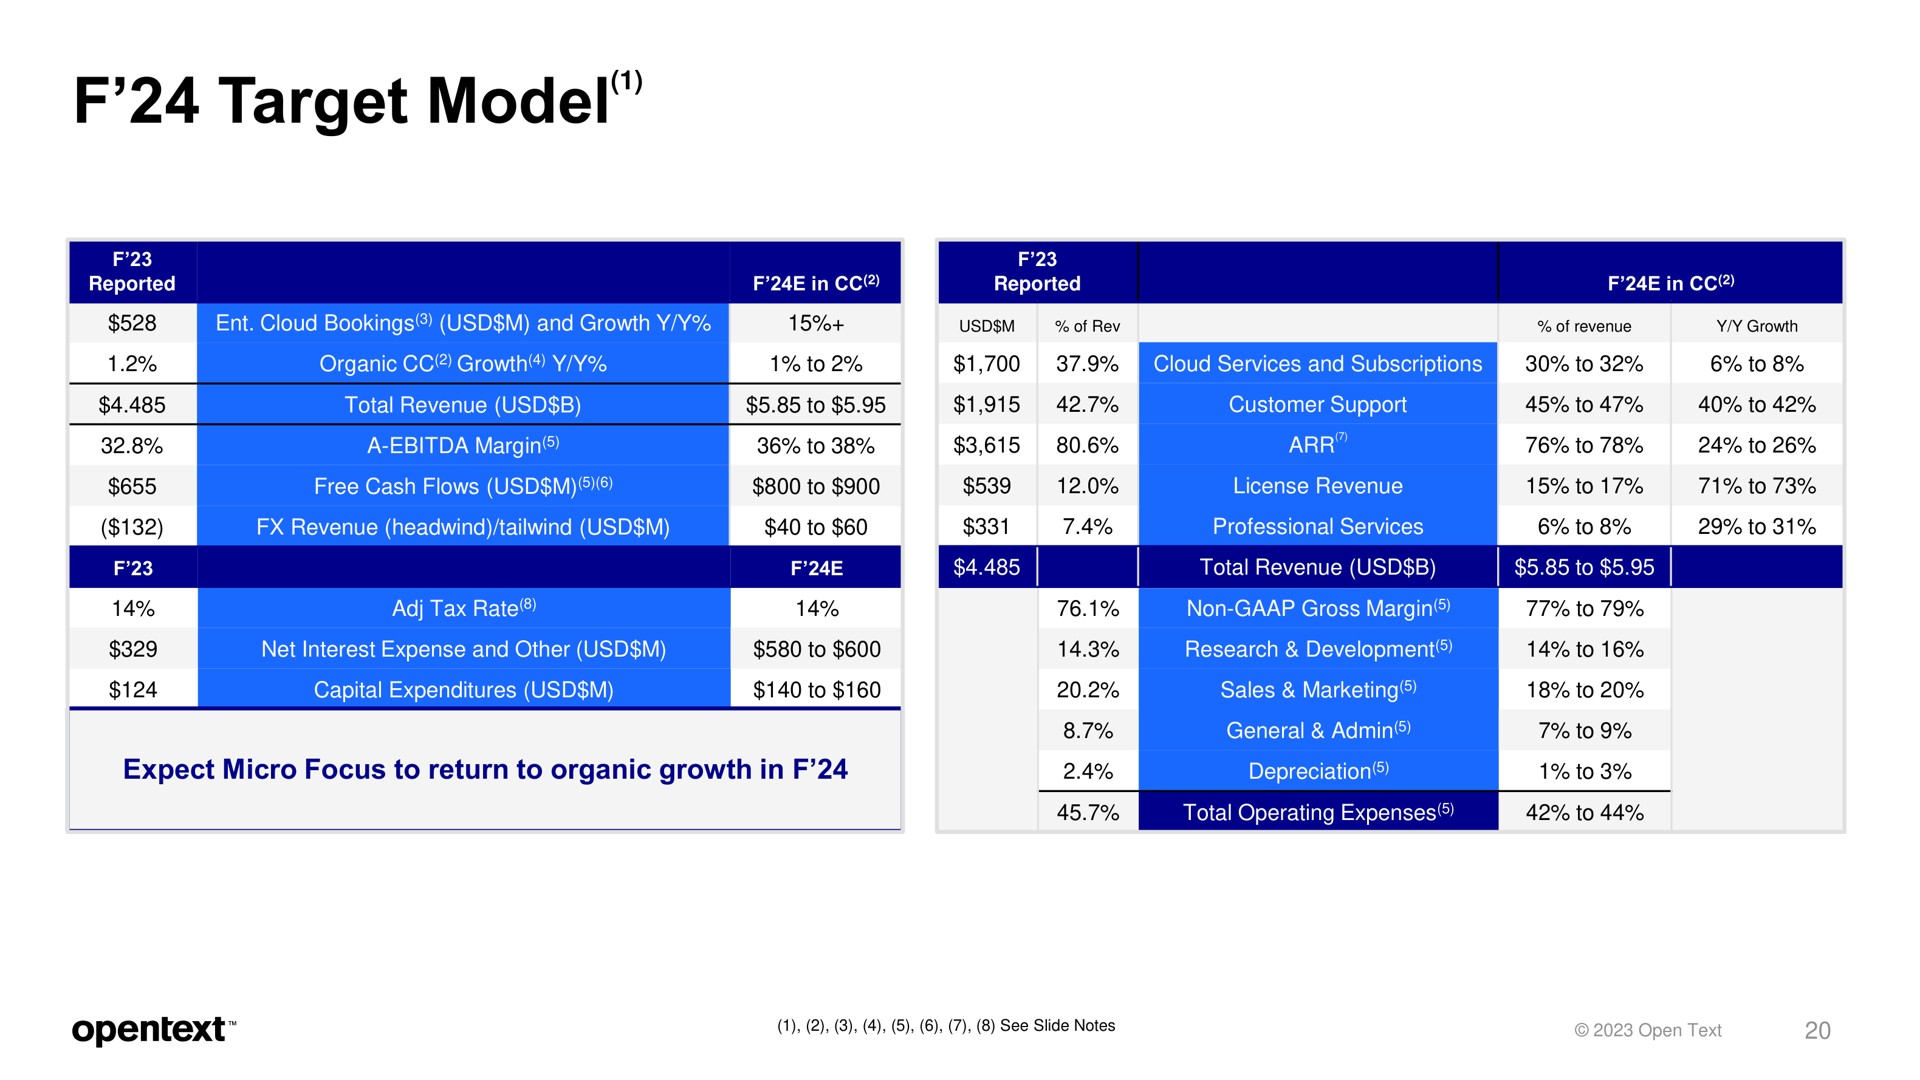 target model medium term aspirations in constant currency | OpenText